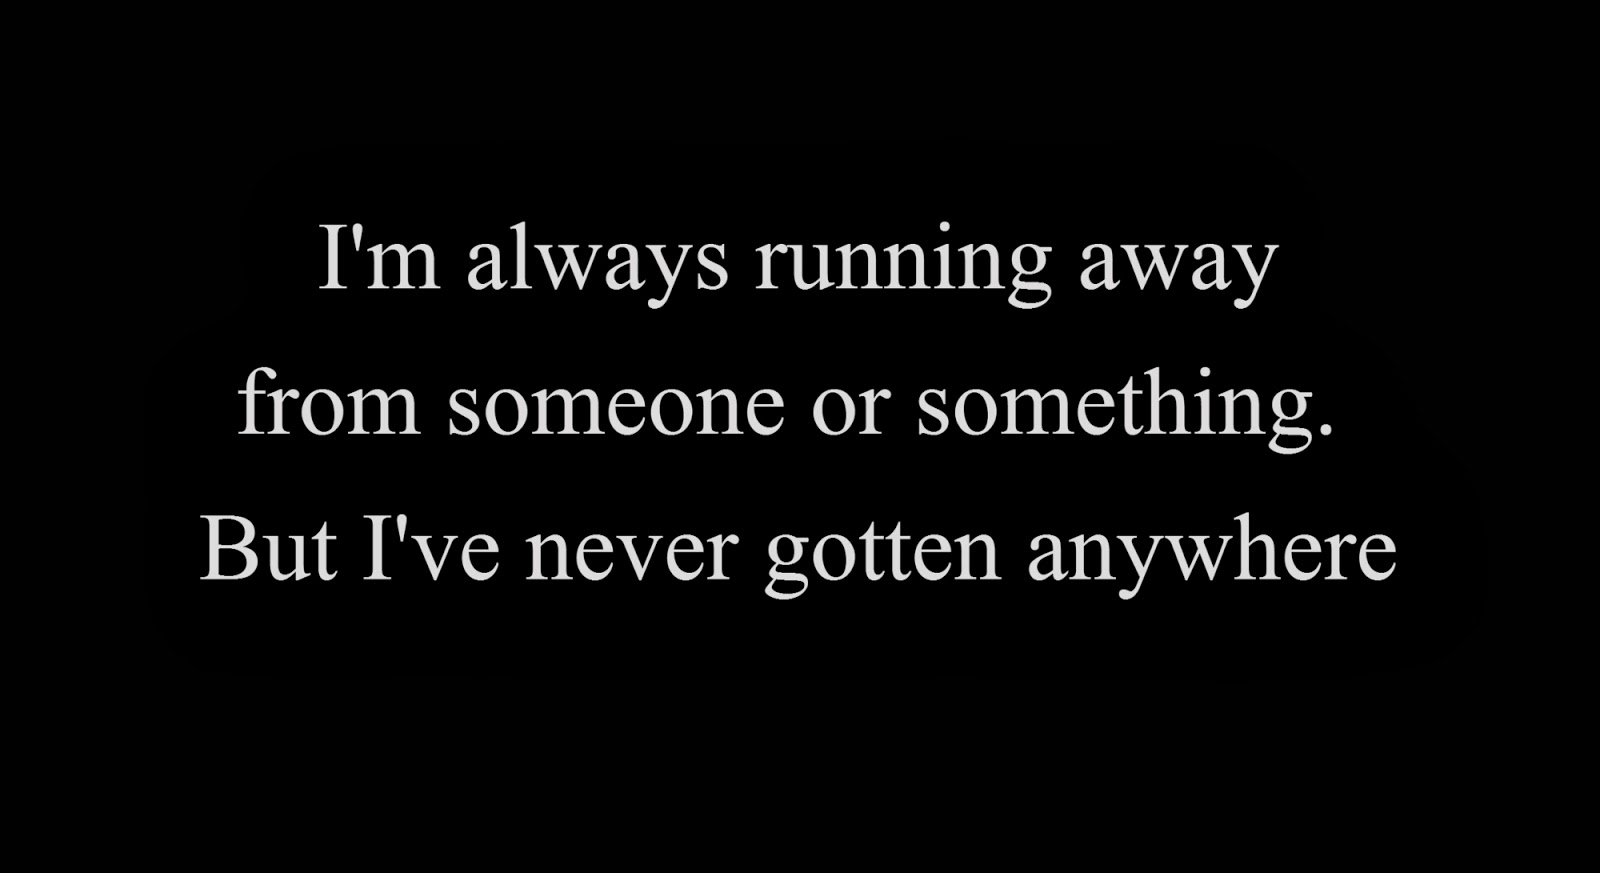 I'm always running away from someone or something. But I've never gotten anywhere